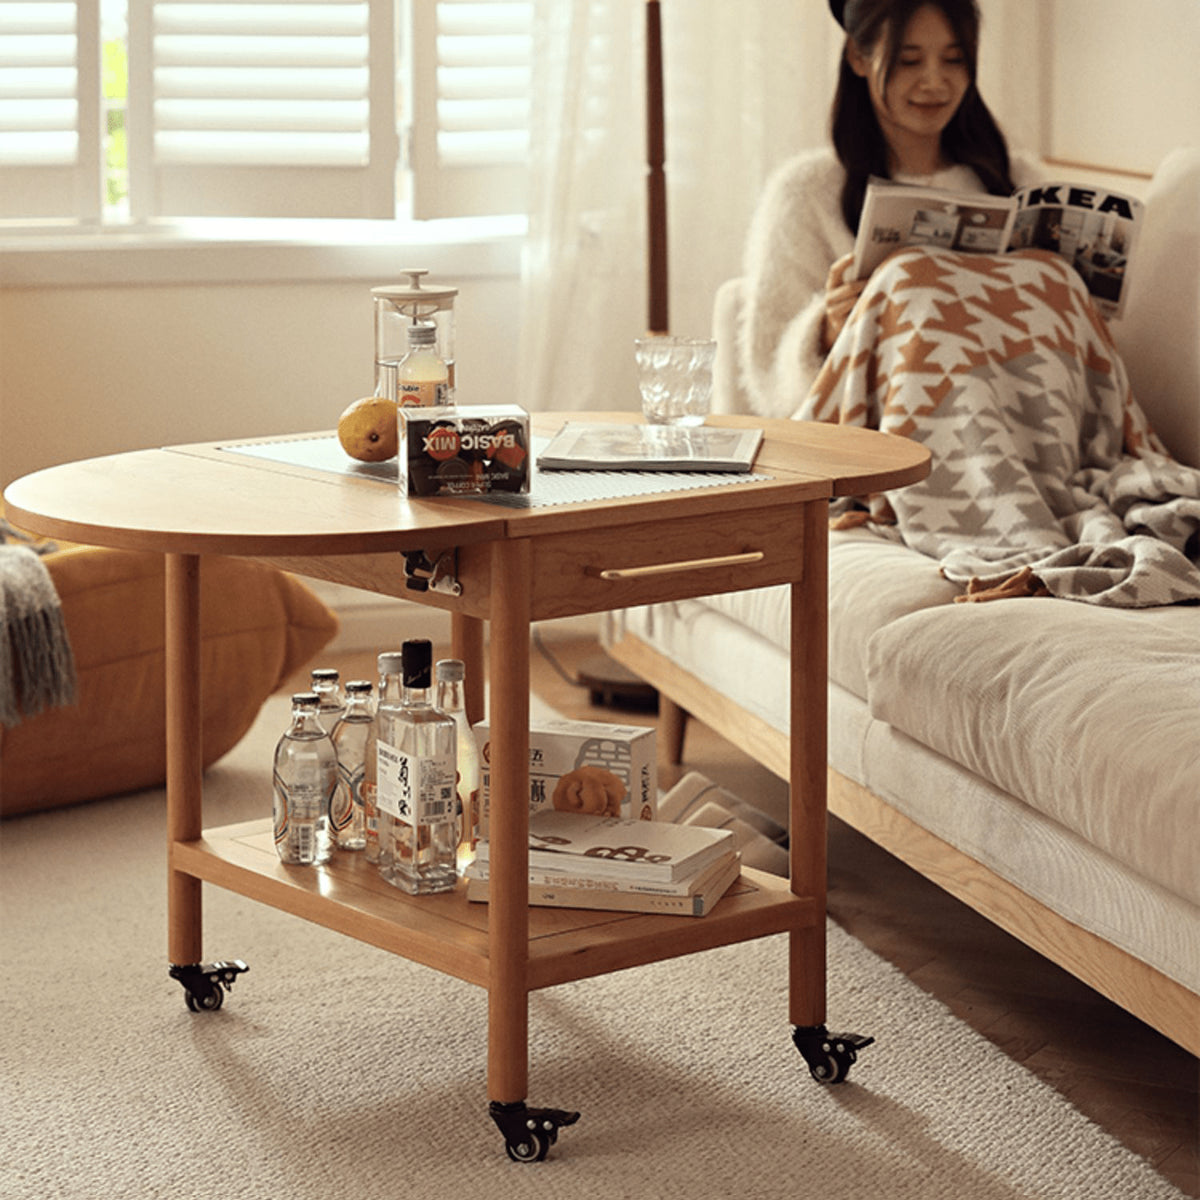 Stylish Light Oak Wood Tea Table with Metal and Nylon Accents - Natural Brown Finish fyg-666